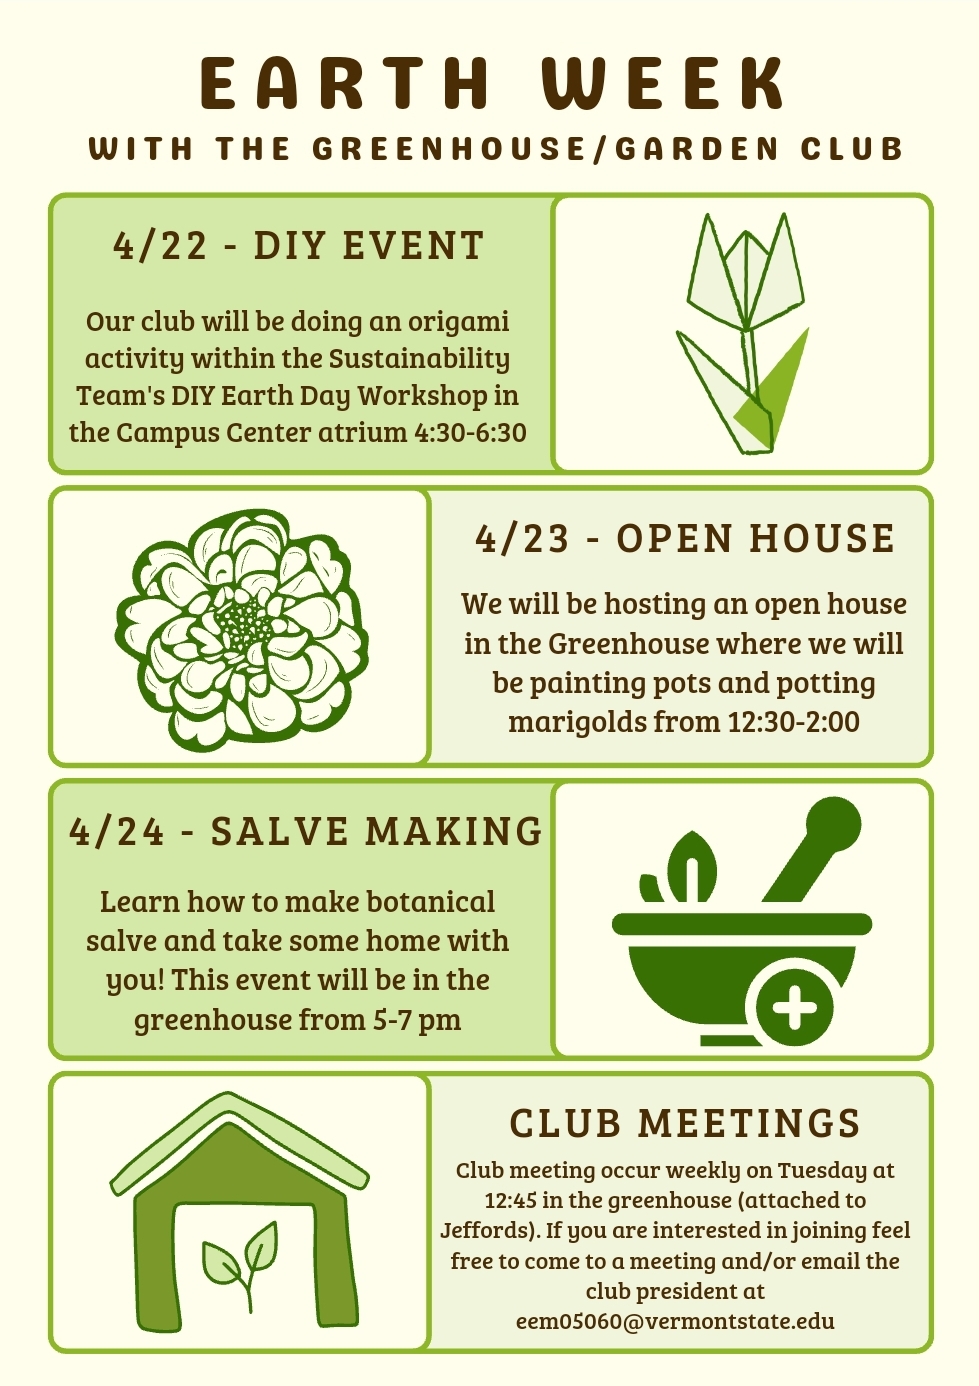 Earth Week with the Greenhouse and Garden Club!